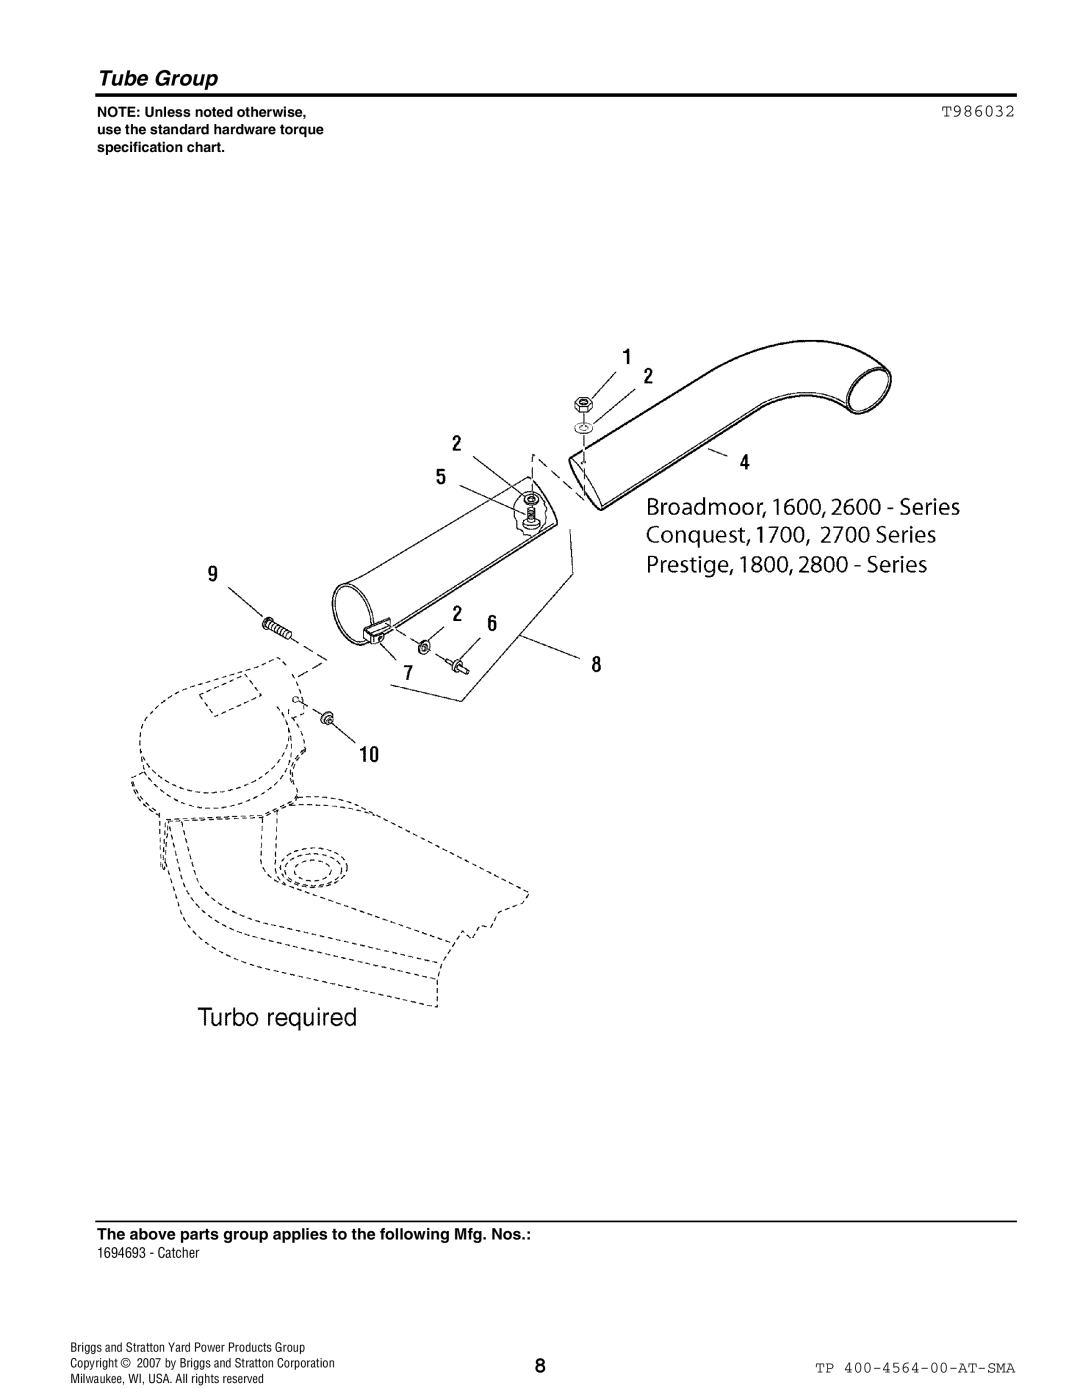 Snapper 4564 manual Tube Group, T986032, NOTE Unless noted otherwise, Briggs and Stratton Yard Power Products Group 